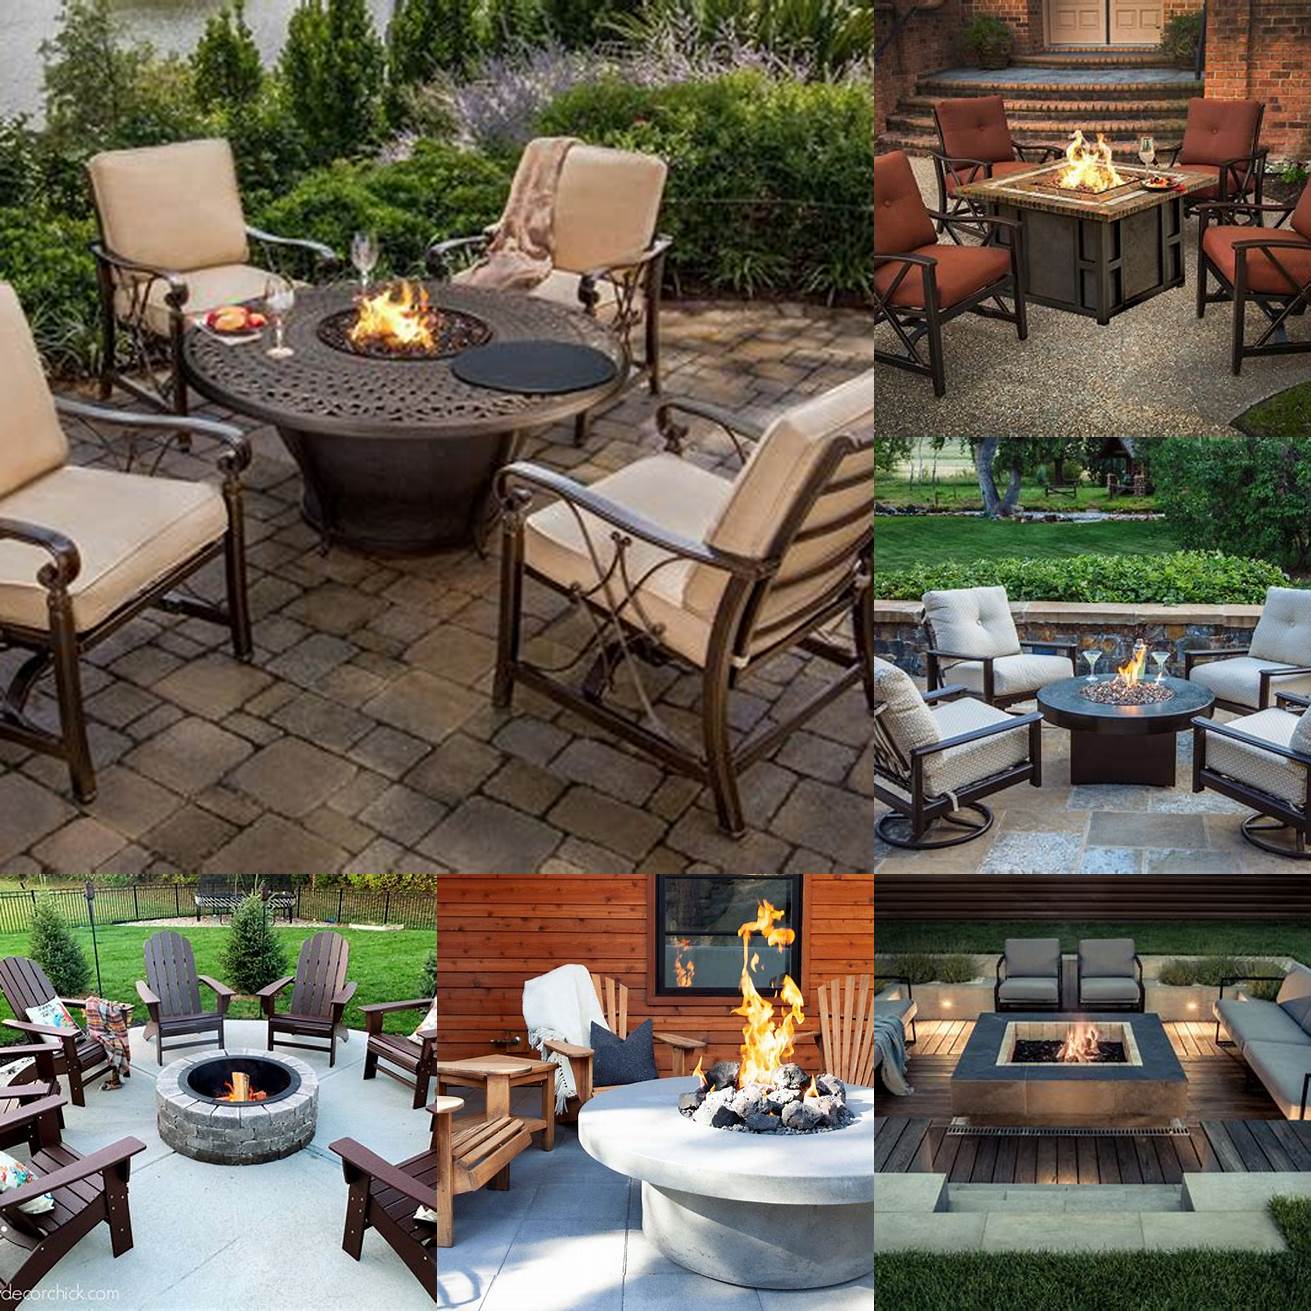 Fire Pit or Fireplace